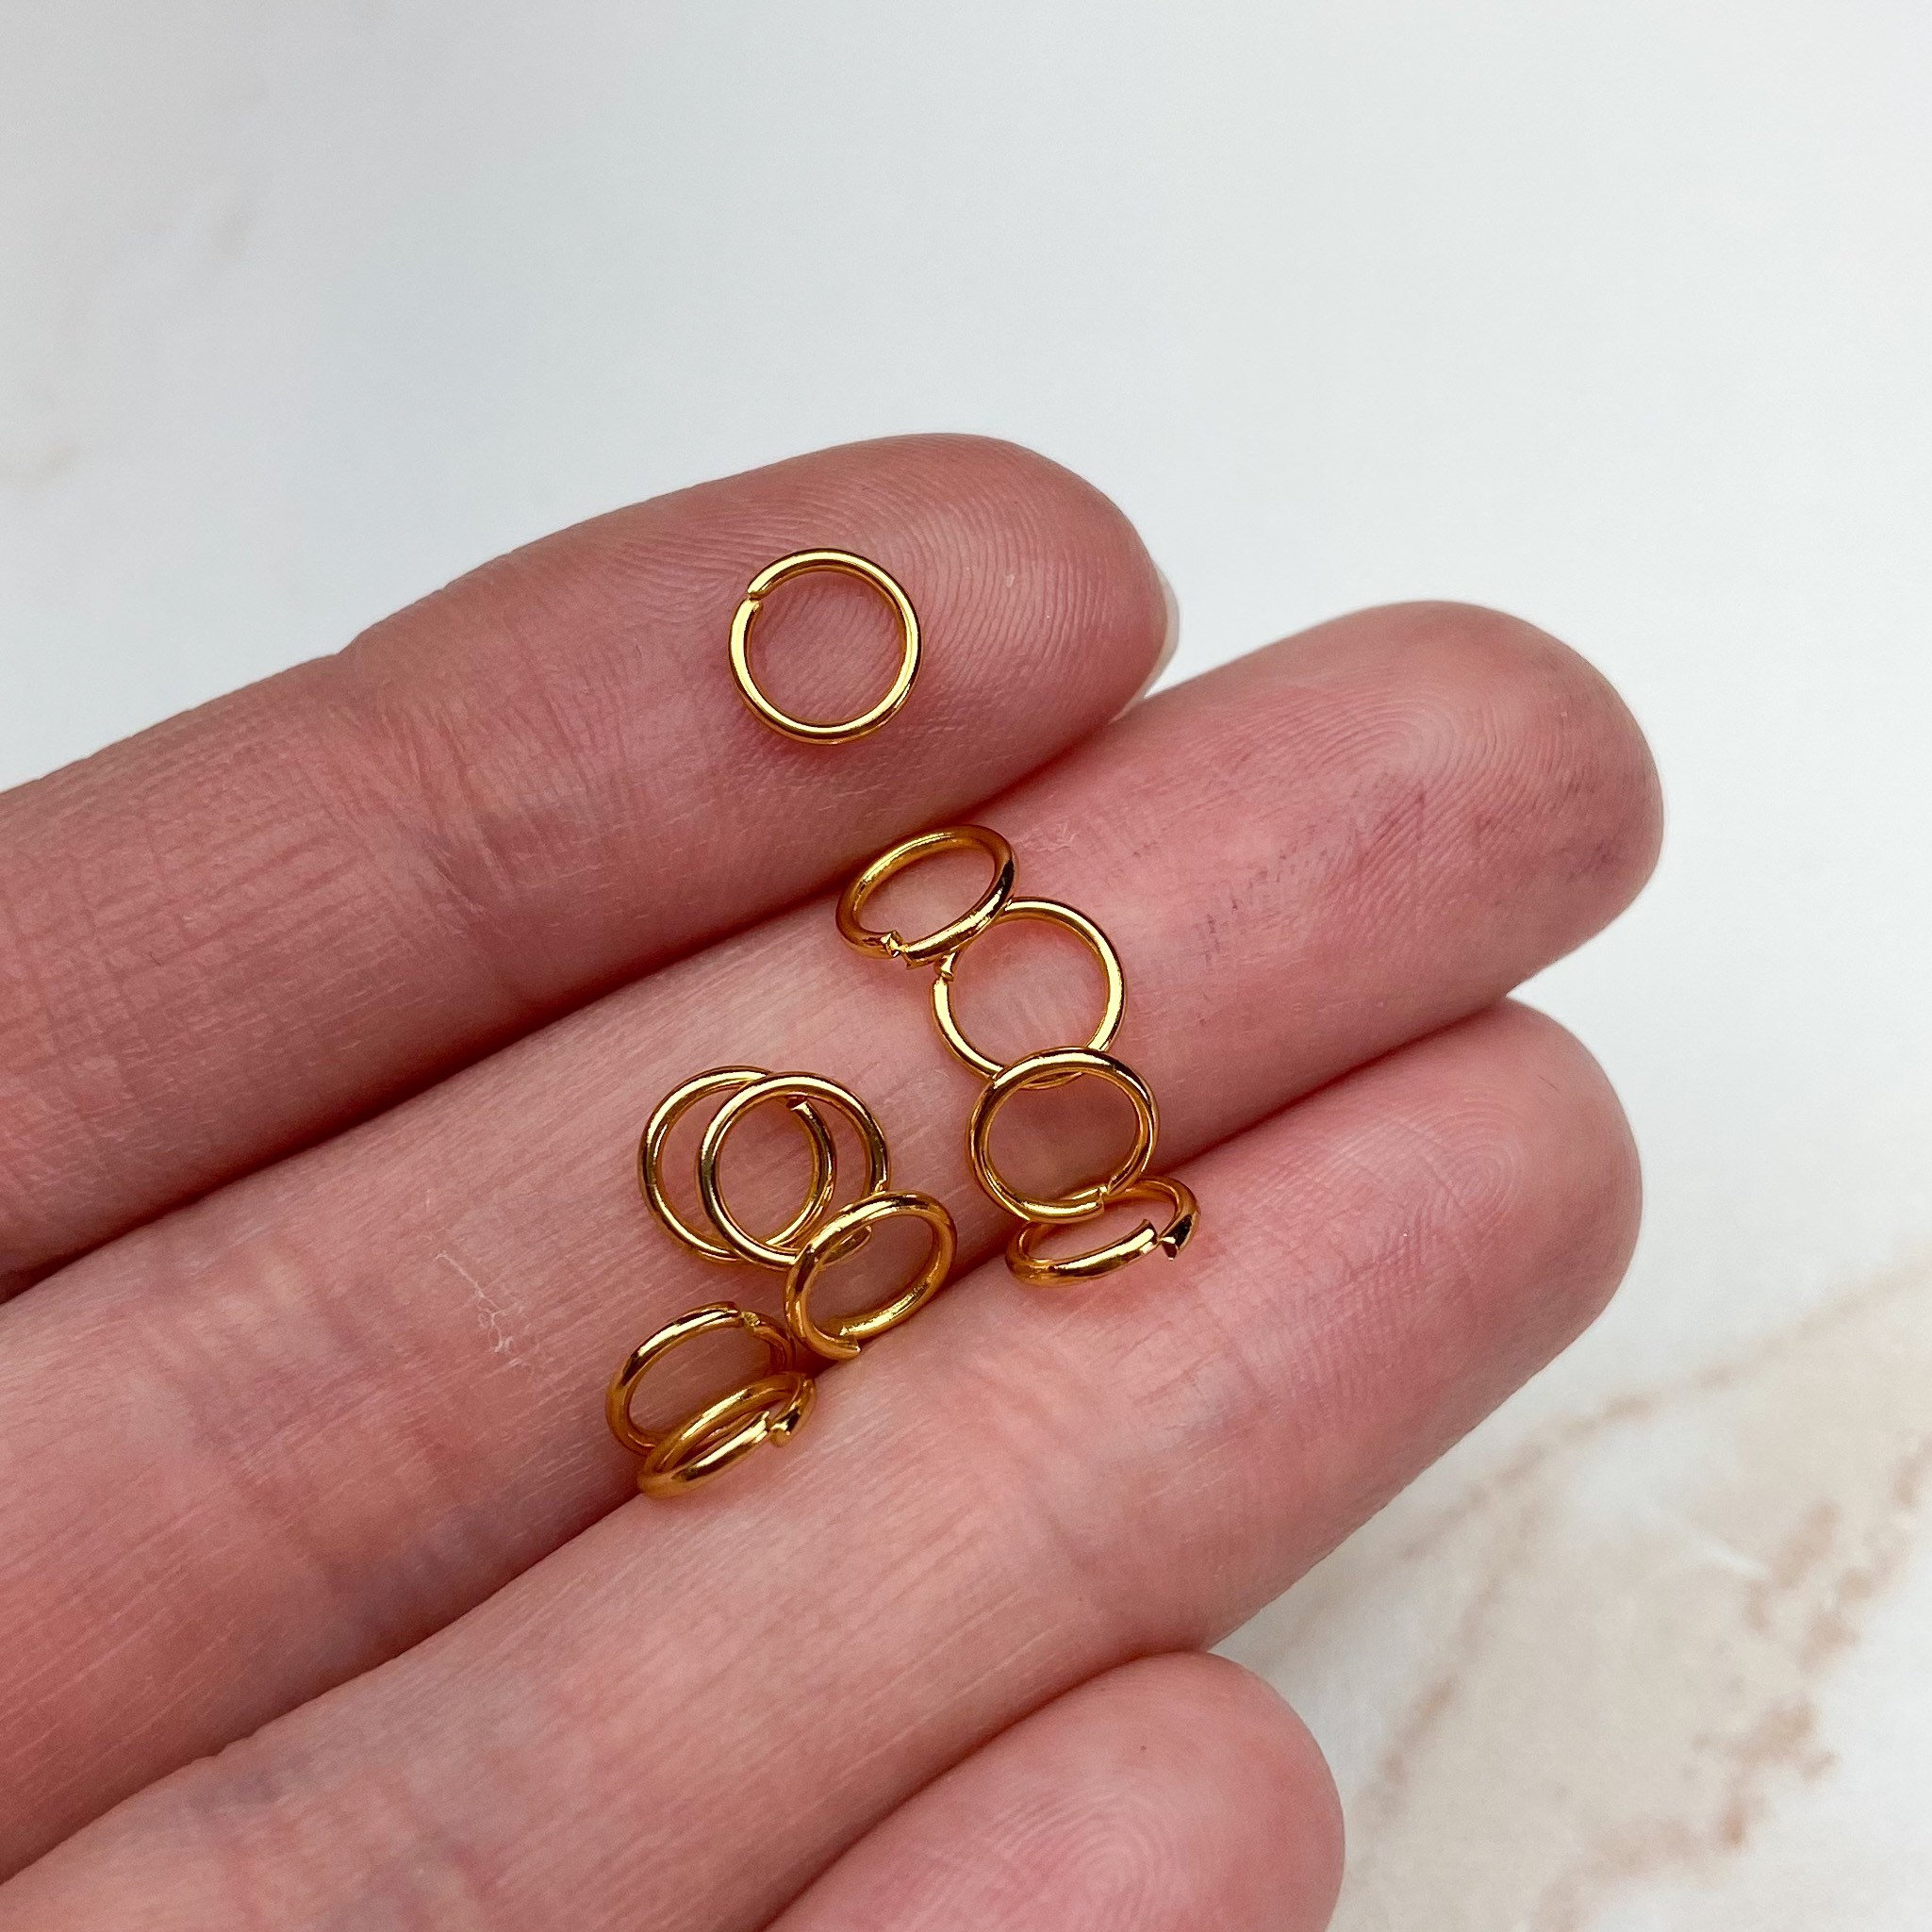 100pcs High Quality 18K Gold Plated Stainless Steel Split Rings